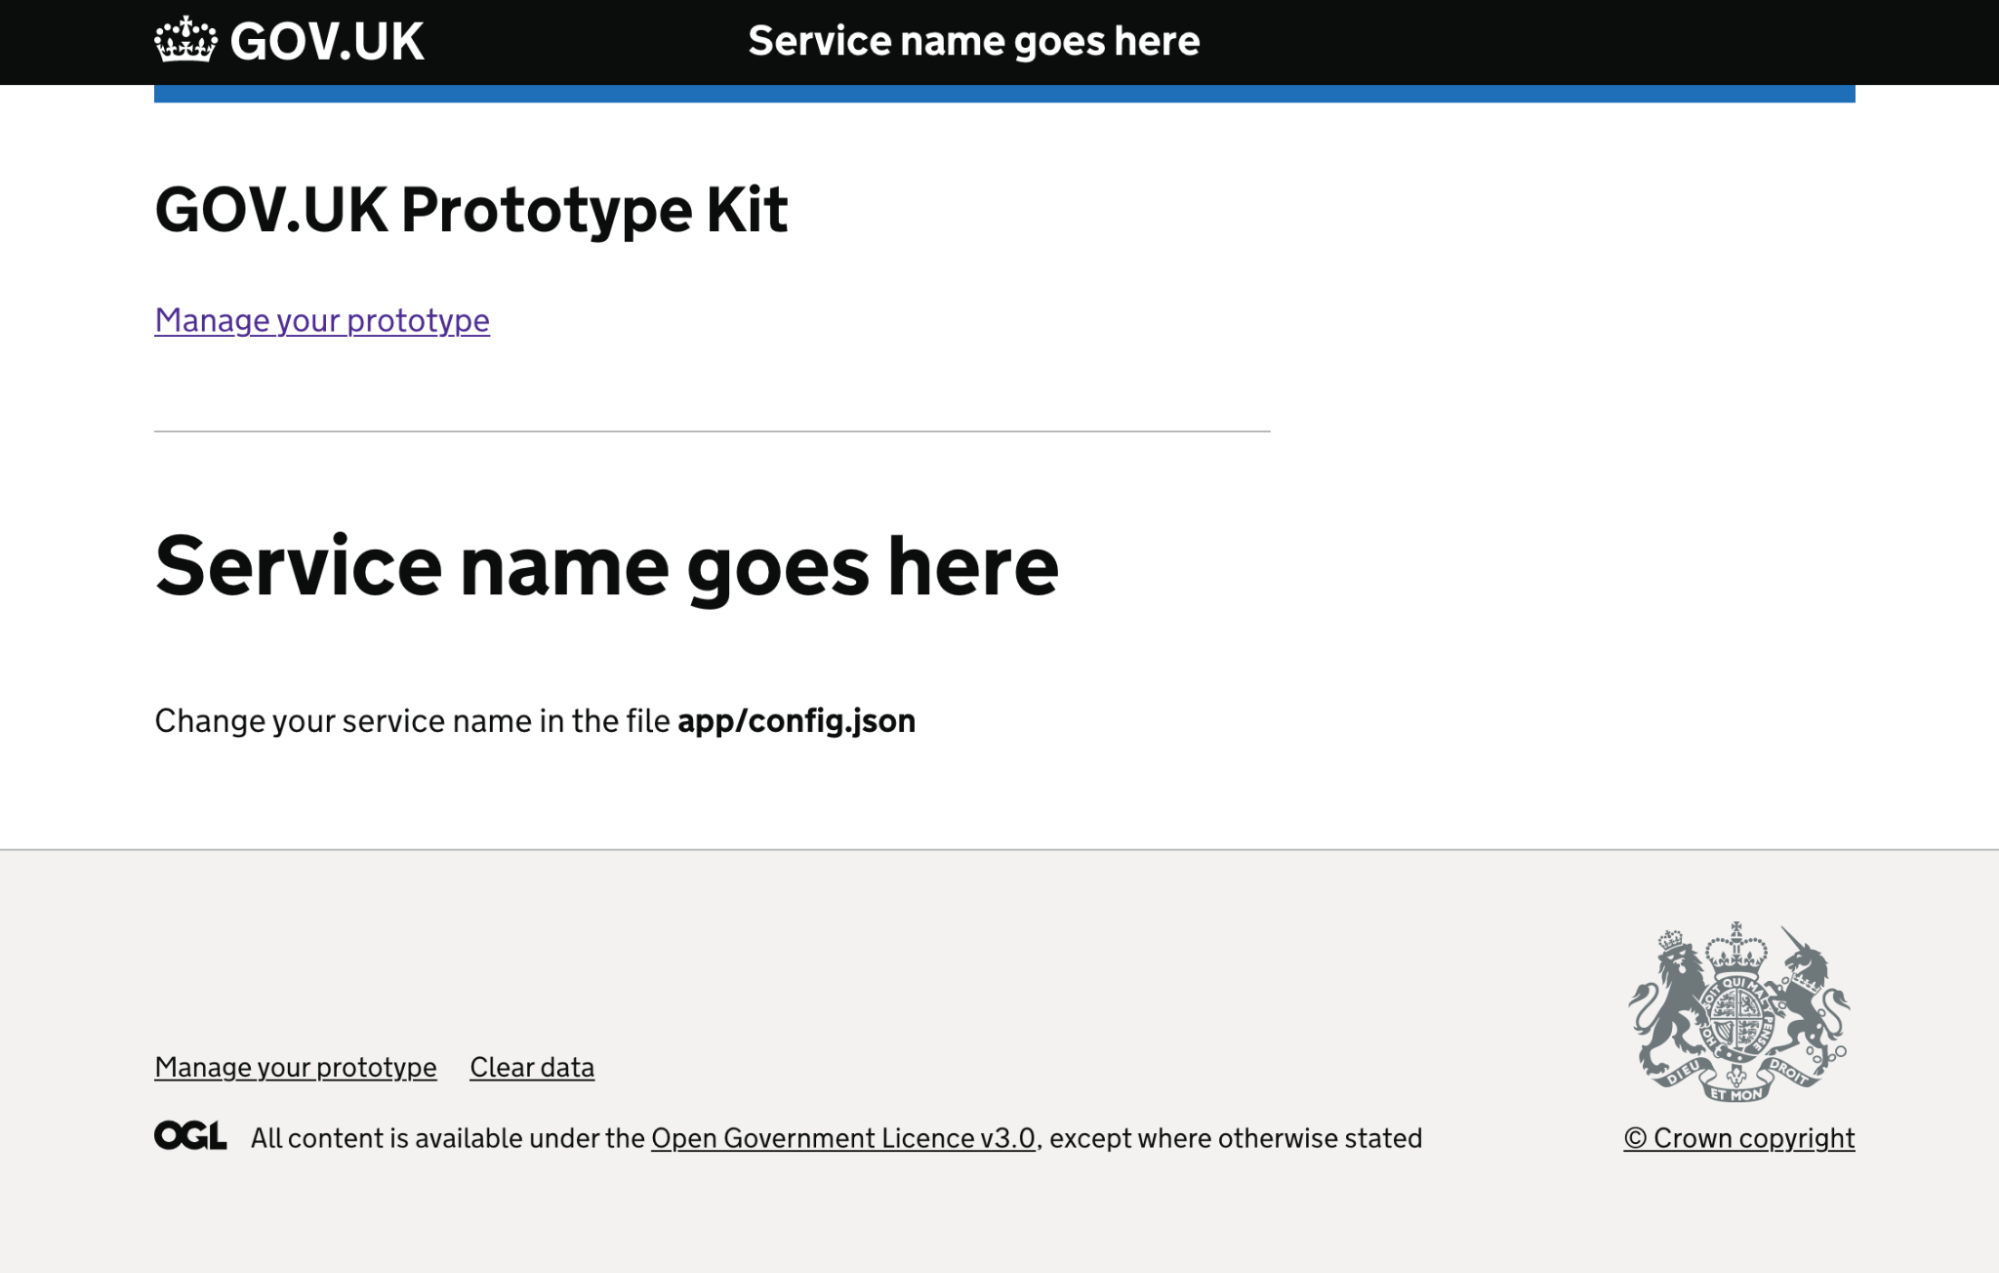 Heading GOV.UK Prototype Kit, link Manage your prototype, Heading Service name goes here, text Change your service name in the file app/config.json